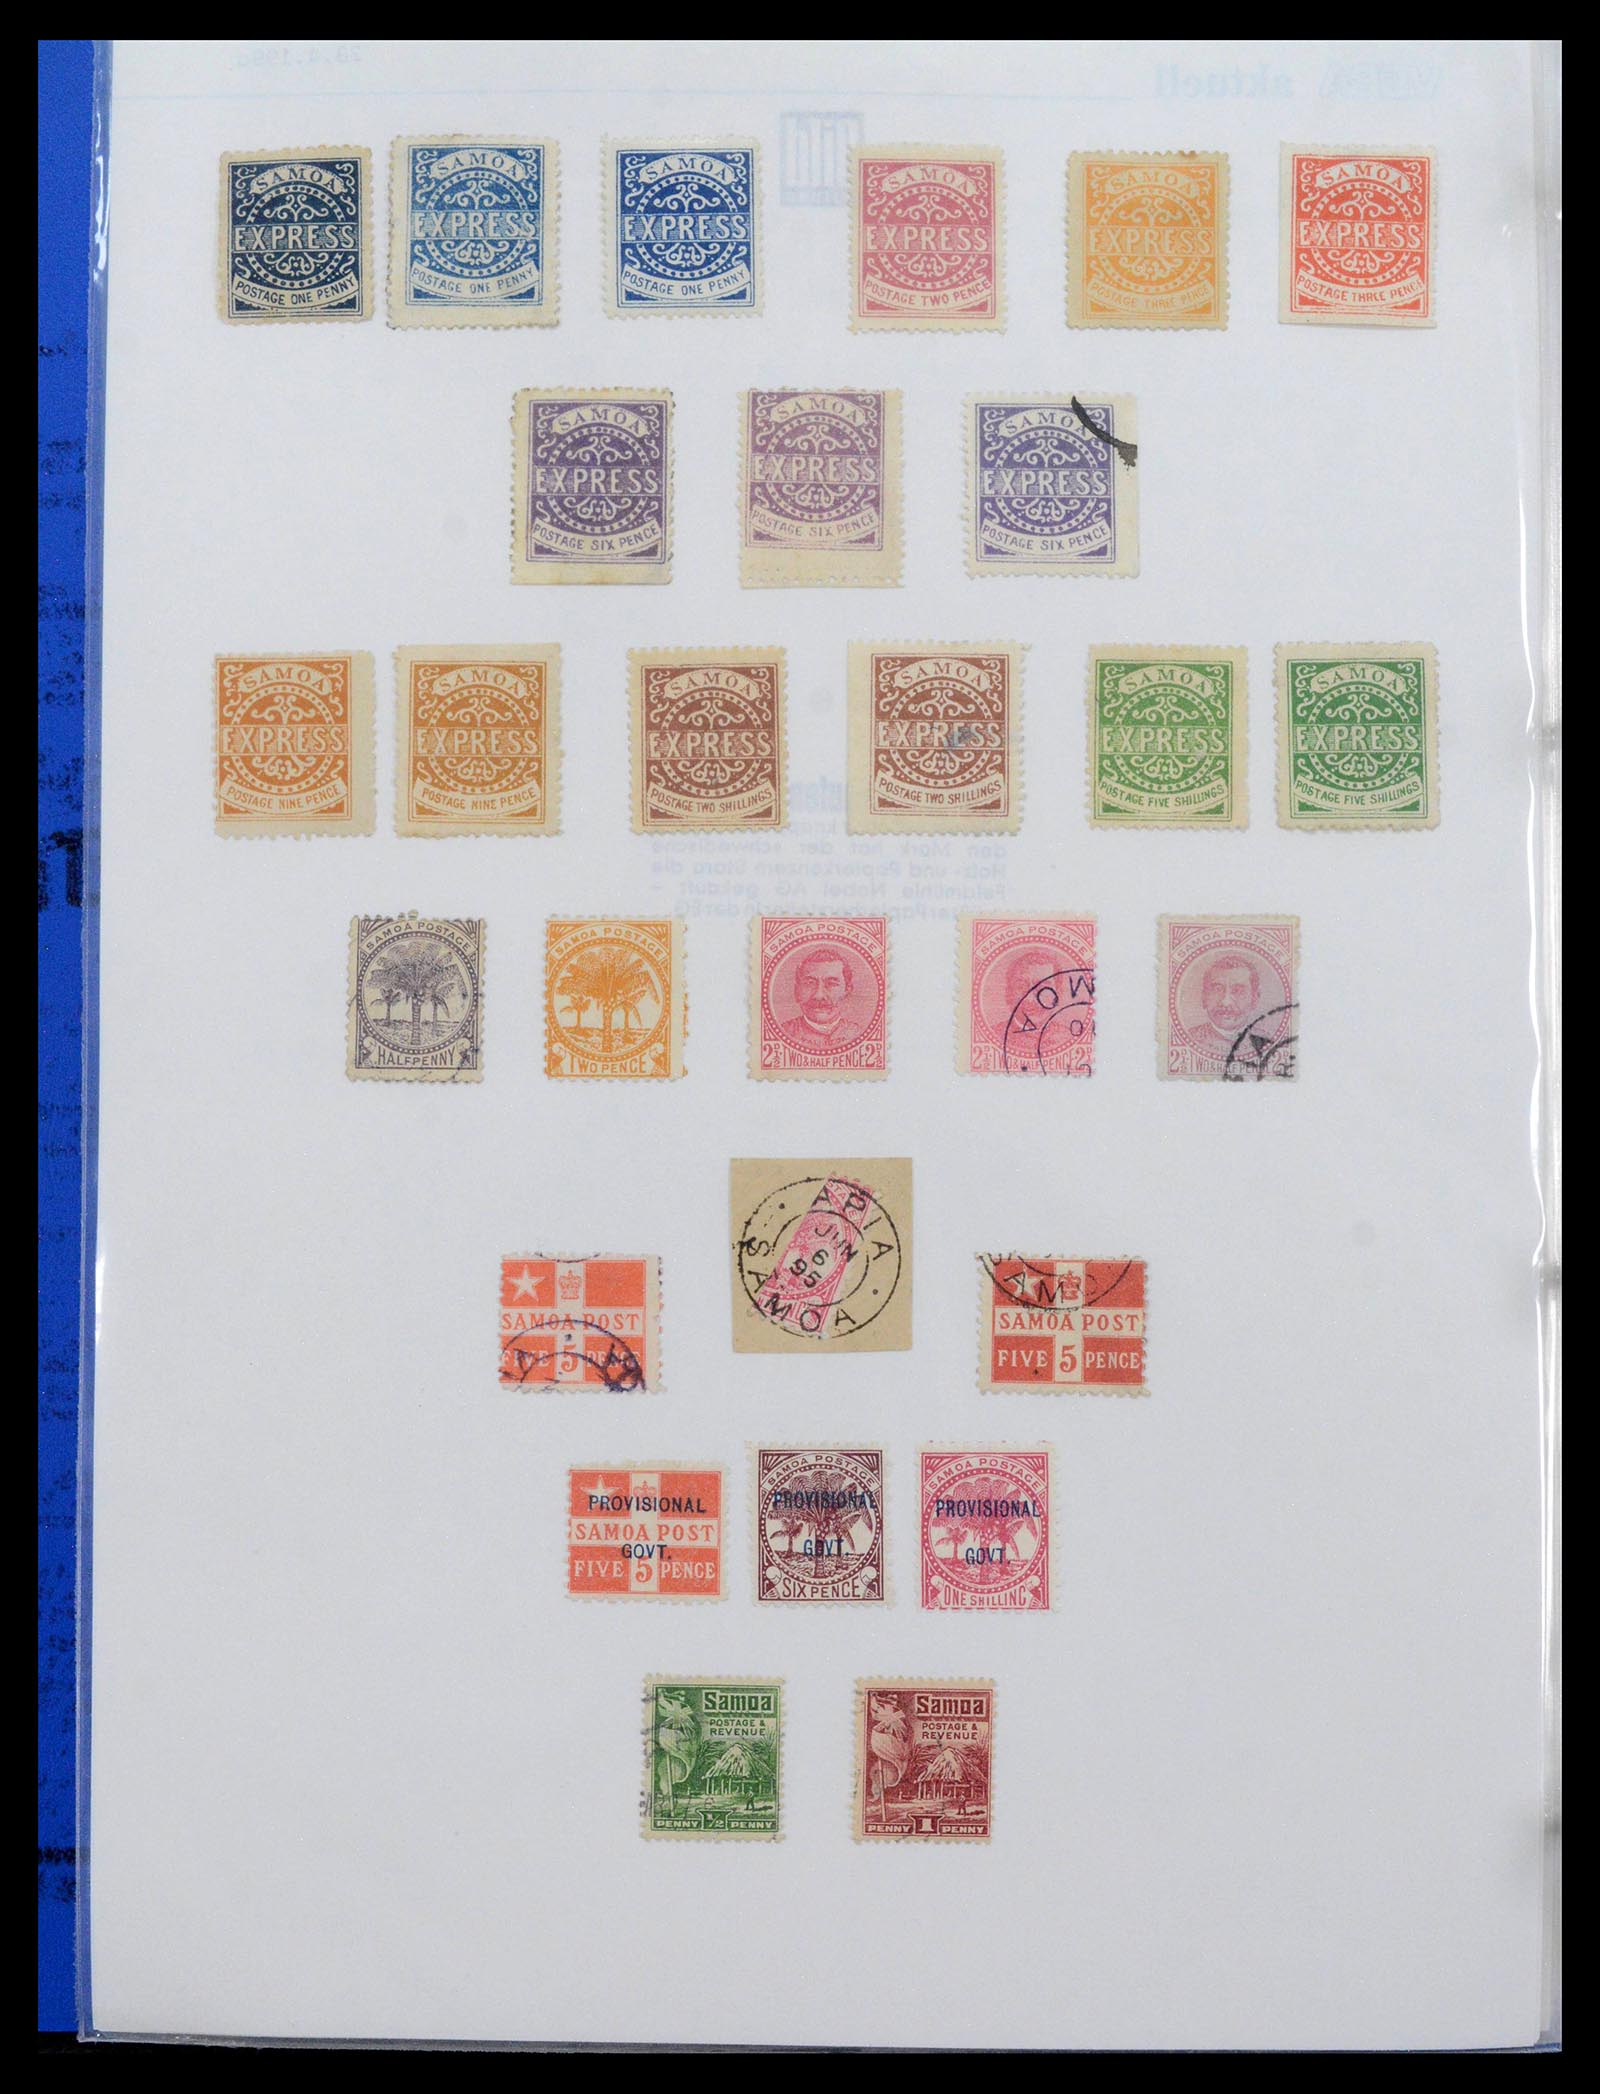 39374 0031 - Stamp collection 39374 USA locals 1850-1880.